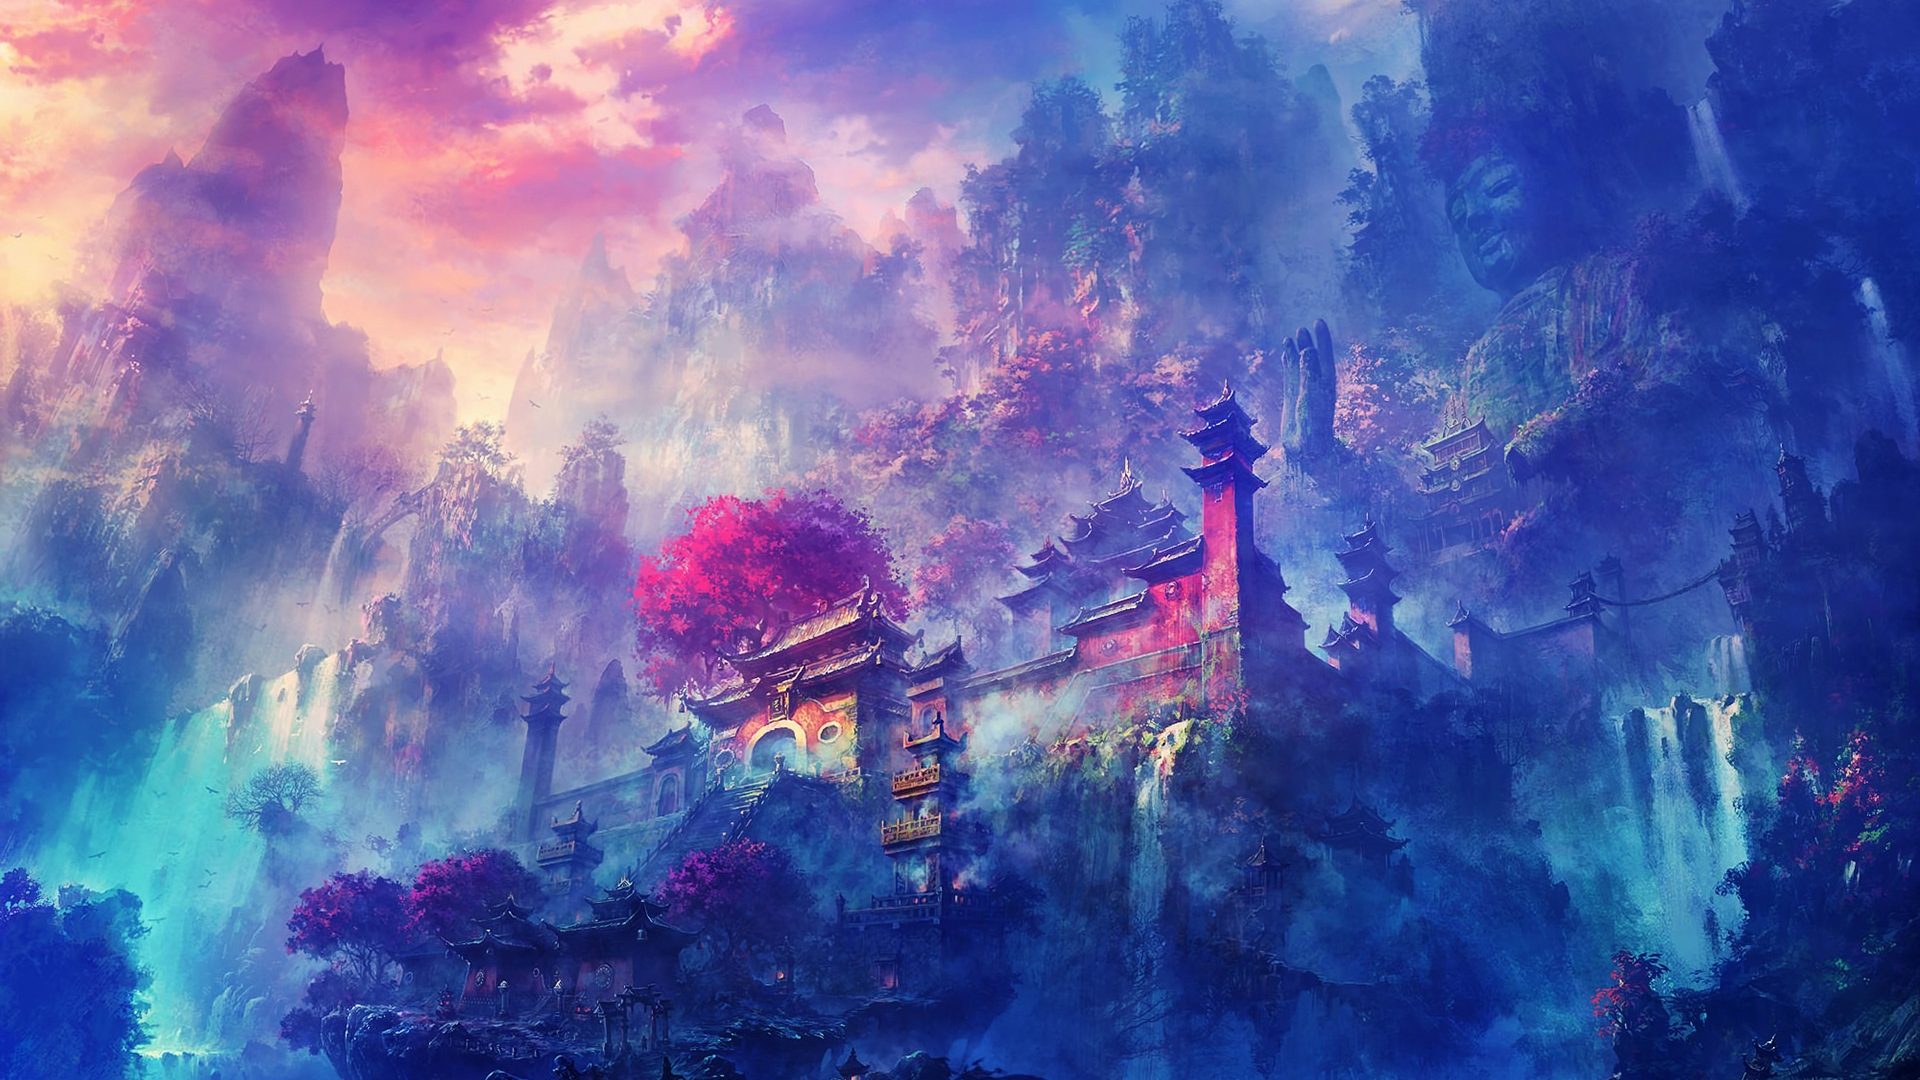 Anime Scenery Wallpaper For Android On HD High